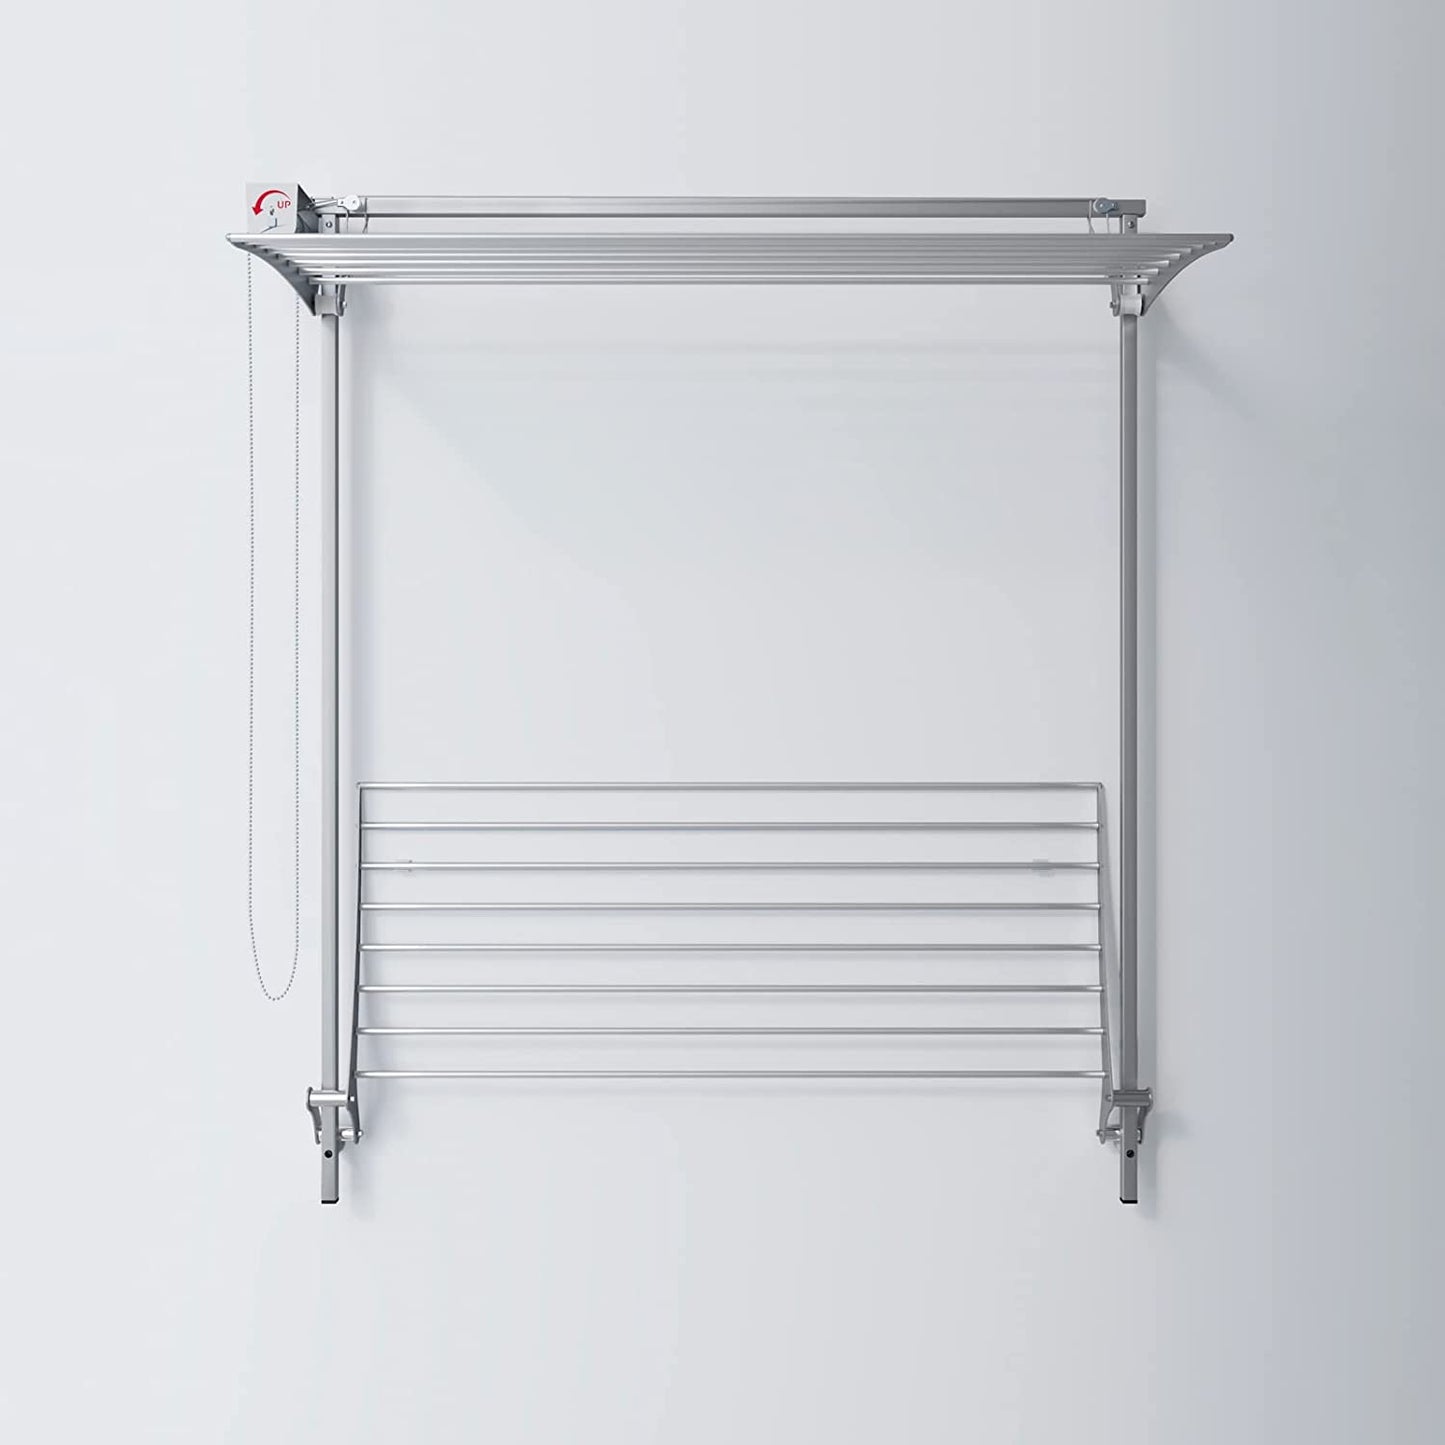 Foxydry Wall Plus, Wall Mounted Drying Rack, Wall Clothesline, Laundry Drying Rack Foldable and Suspended Clothes line in Aluminium and Steel (Wall Pl